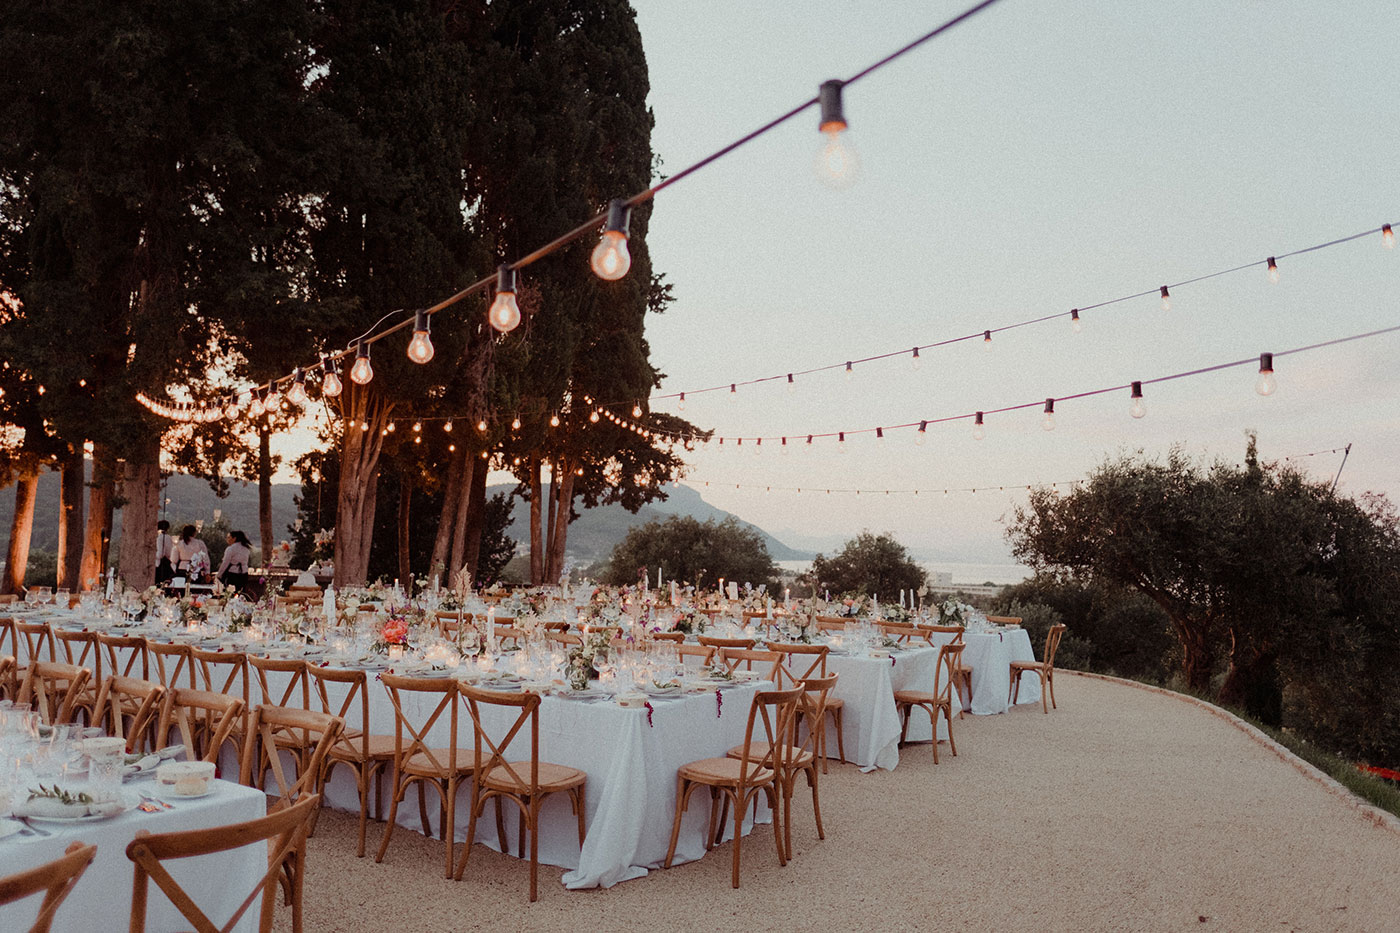 Venue <a href="https://www.wedinspire.com/wedding-venues/corfu/the-courti-estate/" target="_blank" rel="noopener noreferrer">The Courti Estate</a> | Photo by <a href="https://beneathepines.com/" target="_blank" rel="noopener noreferrer">Chris Parkinson</a>